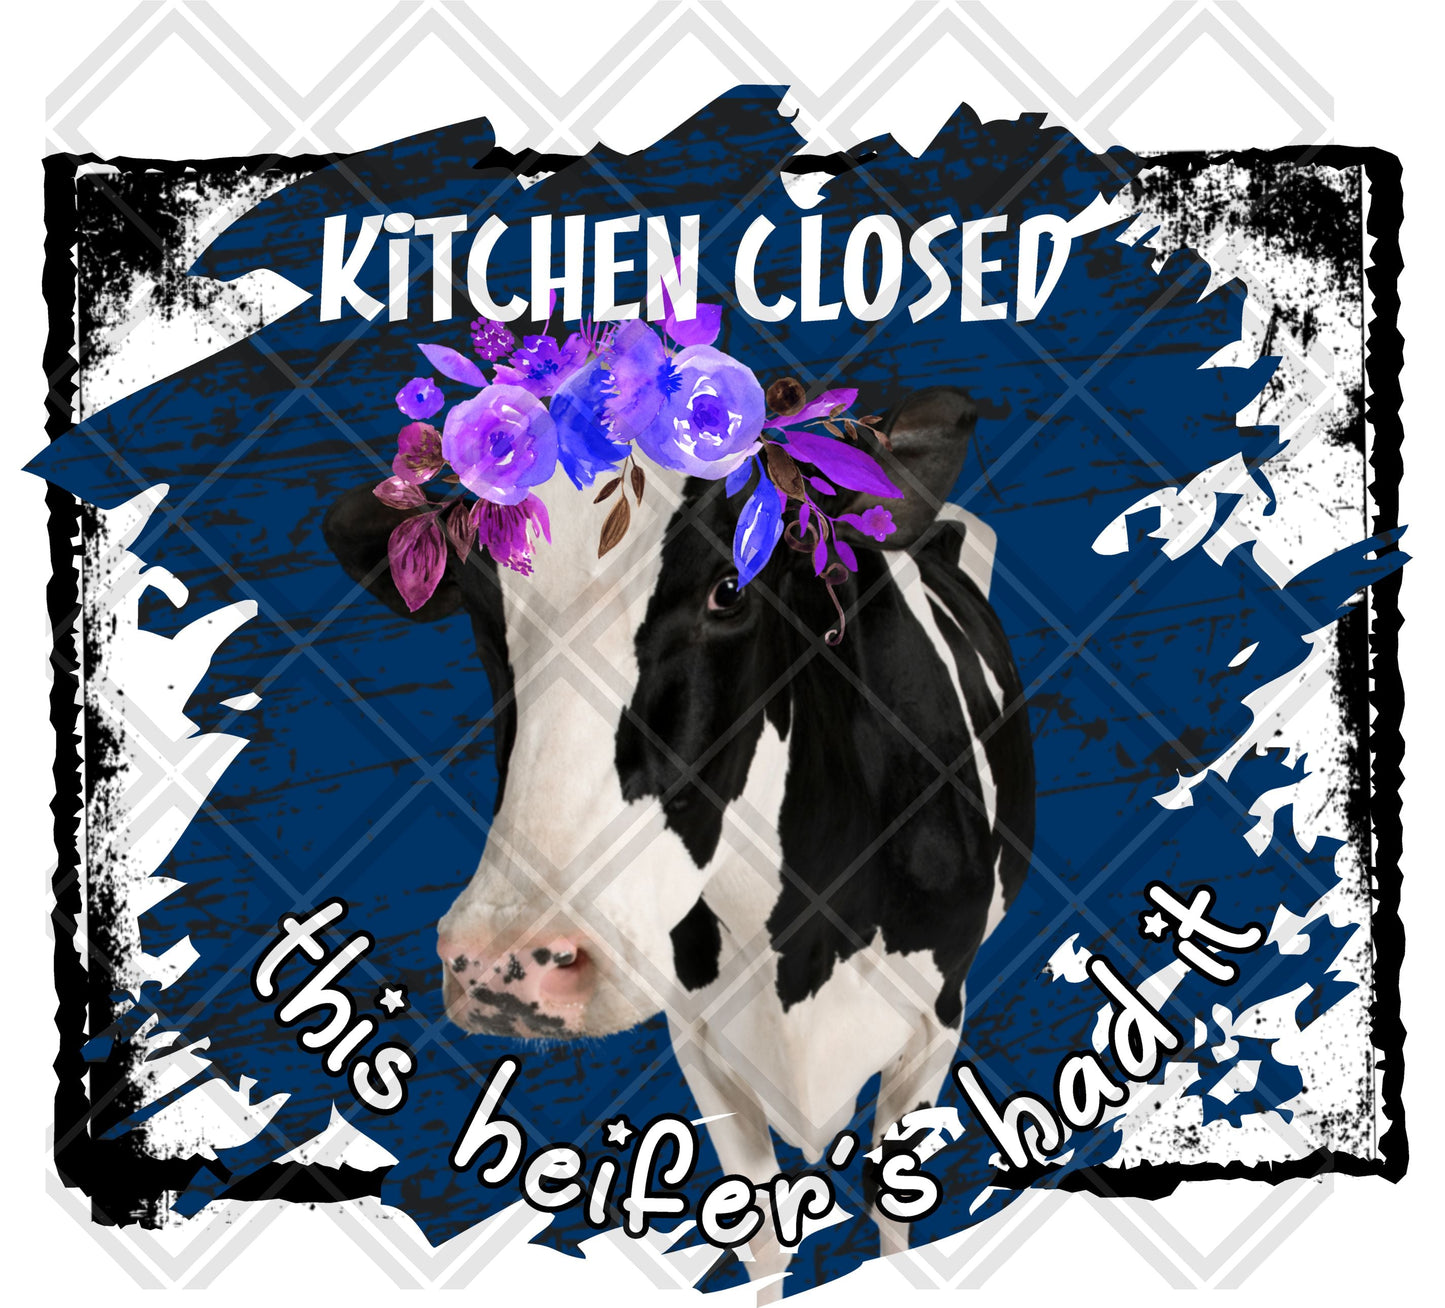 Kitchen closed this hiefer's had it FRAME Digital Download Instand Download